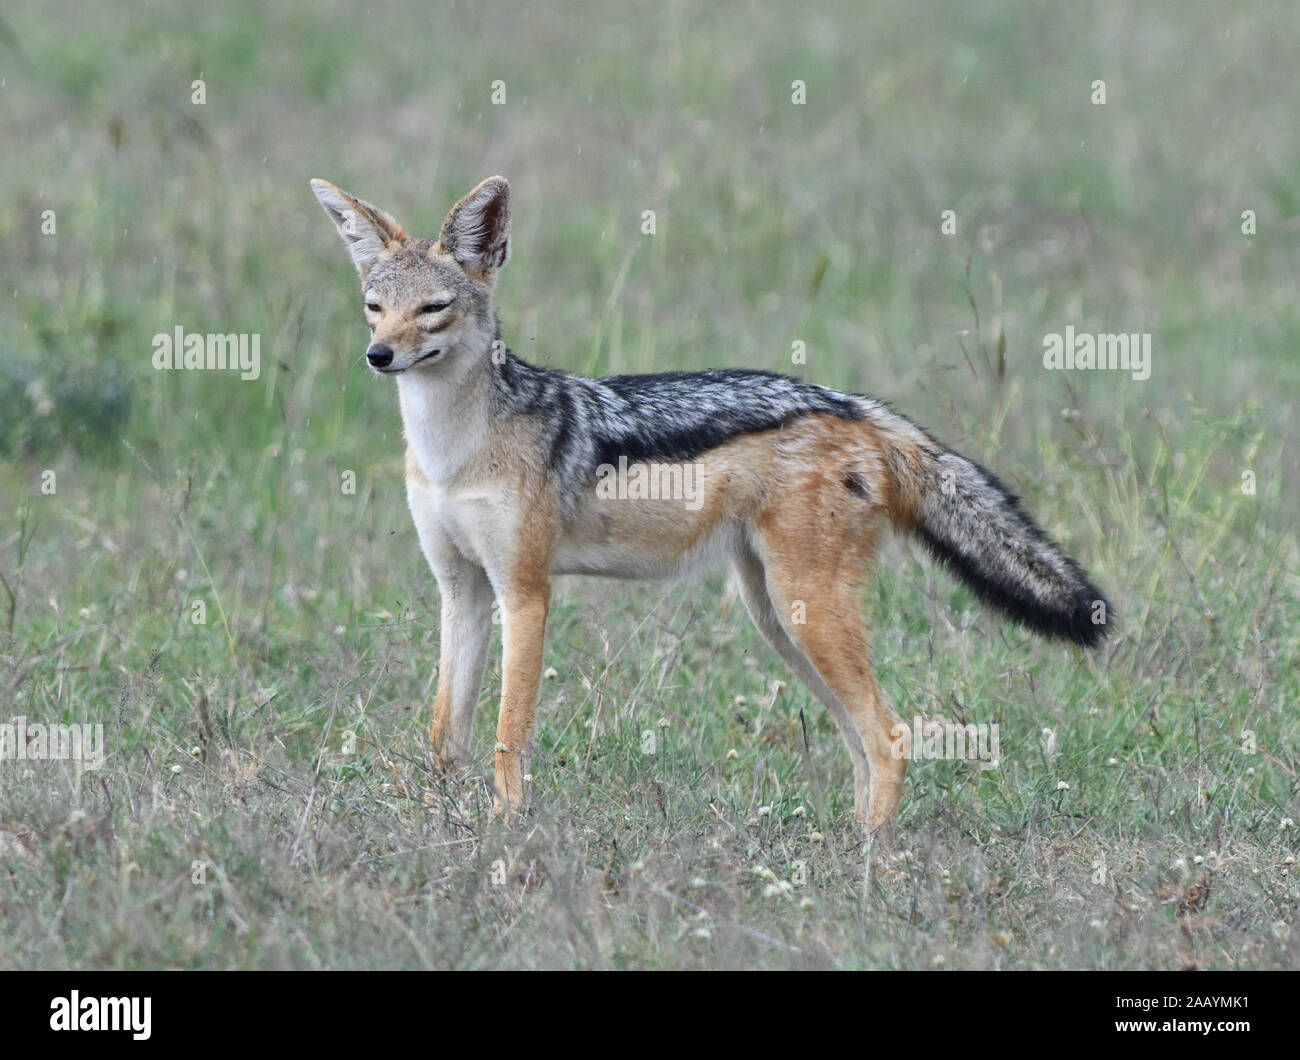 A male black-backed jackal (Canis mesomelas) pauses while loping through the dry grass of the Serengeti. Serengeti National Park, Tanzania. Stock Photo